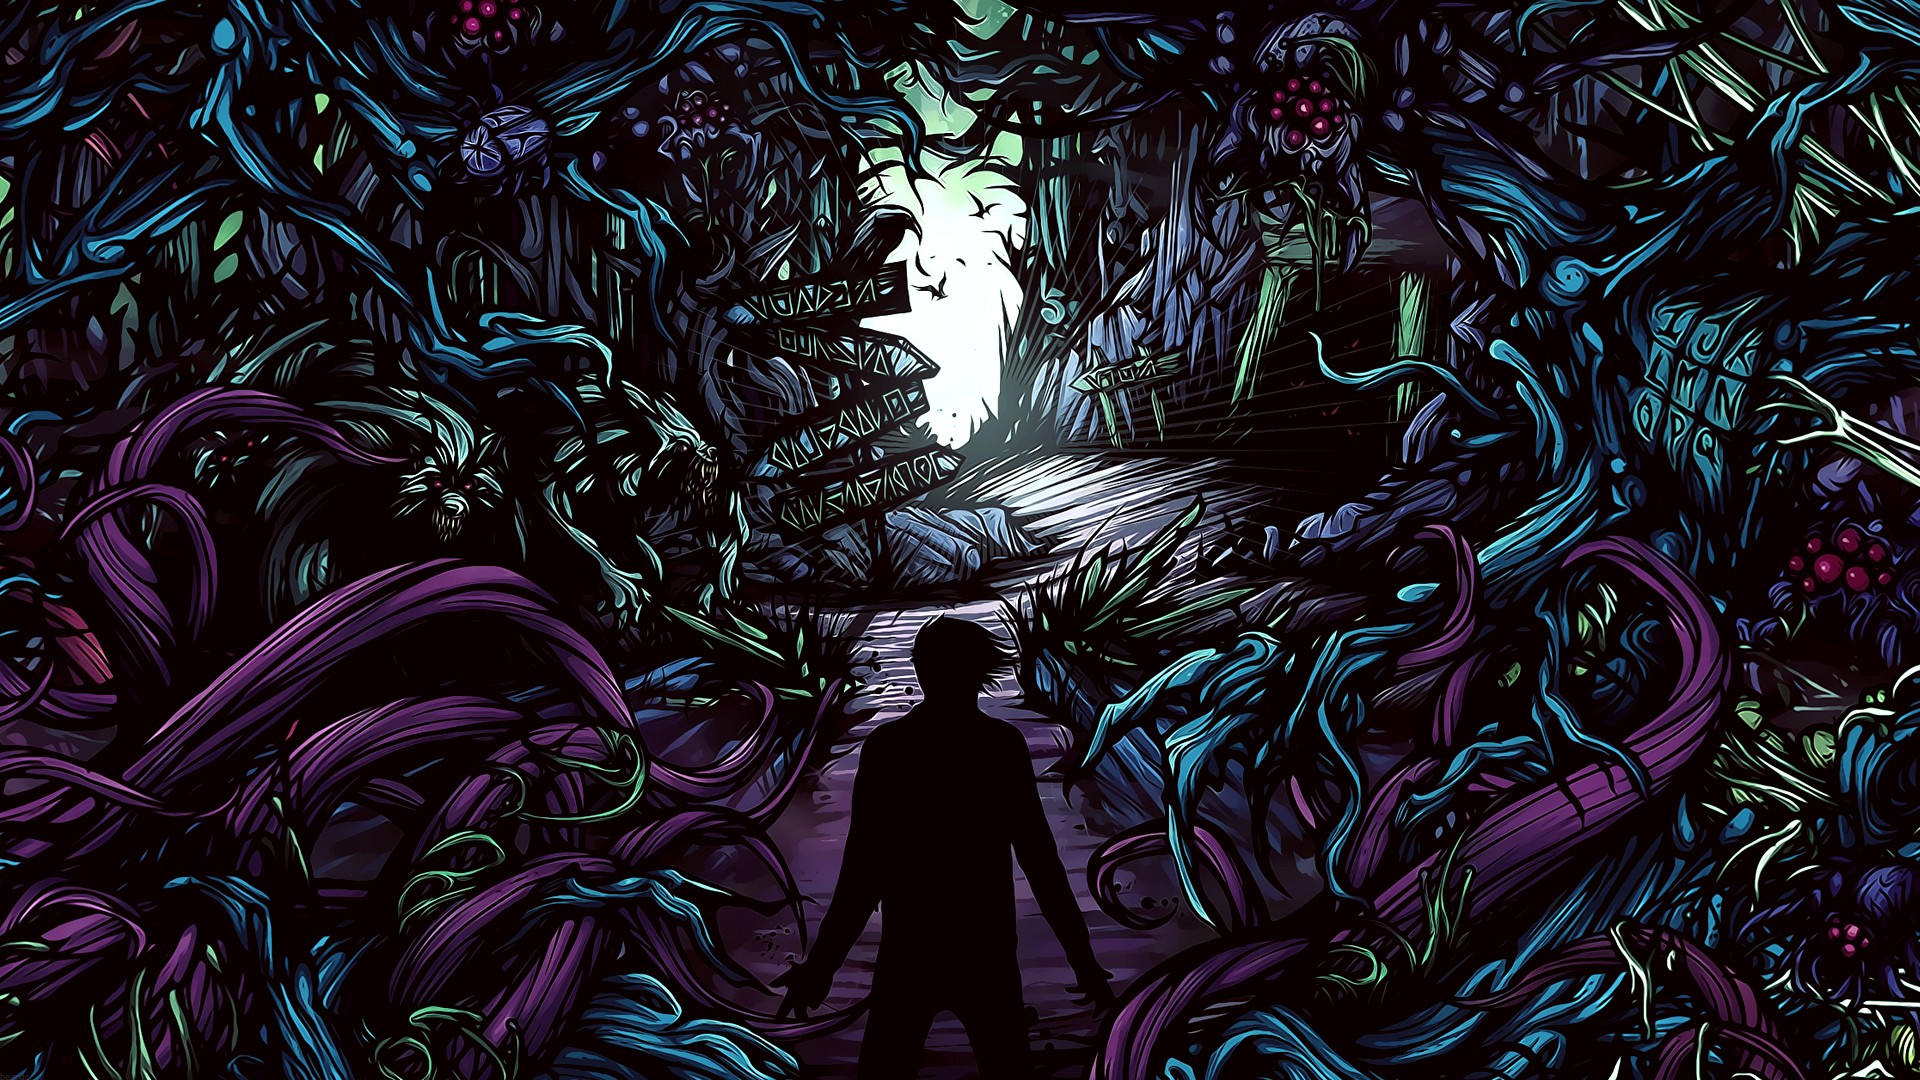 music, A Day to Remember, Post hardcore, Album covers, Cover art Wallpaper